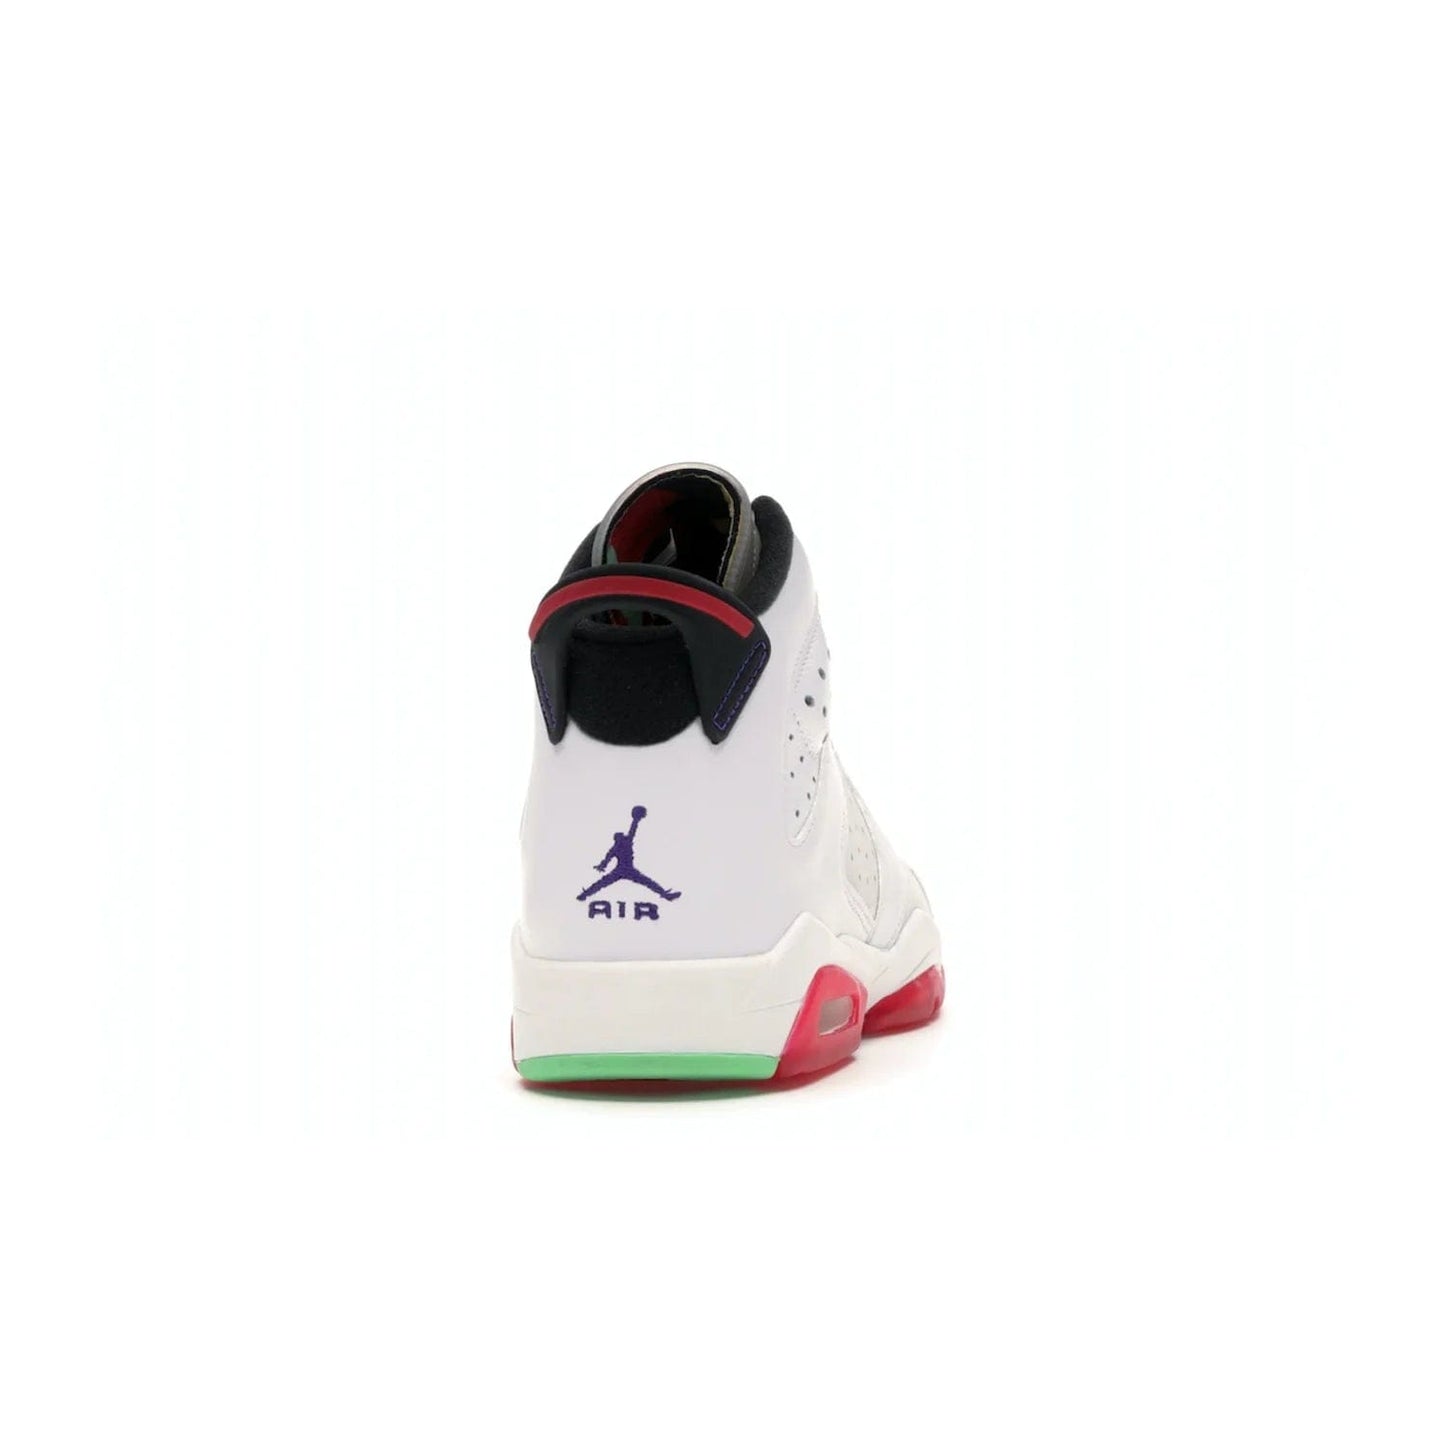 Jordan 6 Retro Hare (GS) - Image 29 - Only at www.BallersClubKickz.com - The Air Jordan 6 Hare GS. Comfortable suede upper, perforations, red pods, two-tone midsole, and signature "Jumpman" emblem. Released 17 June 2020. Perfect for any sneakerhead.